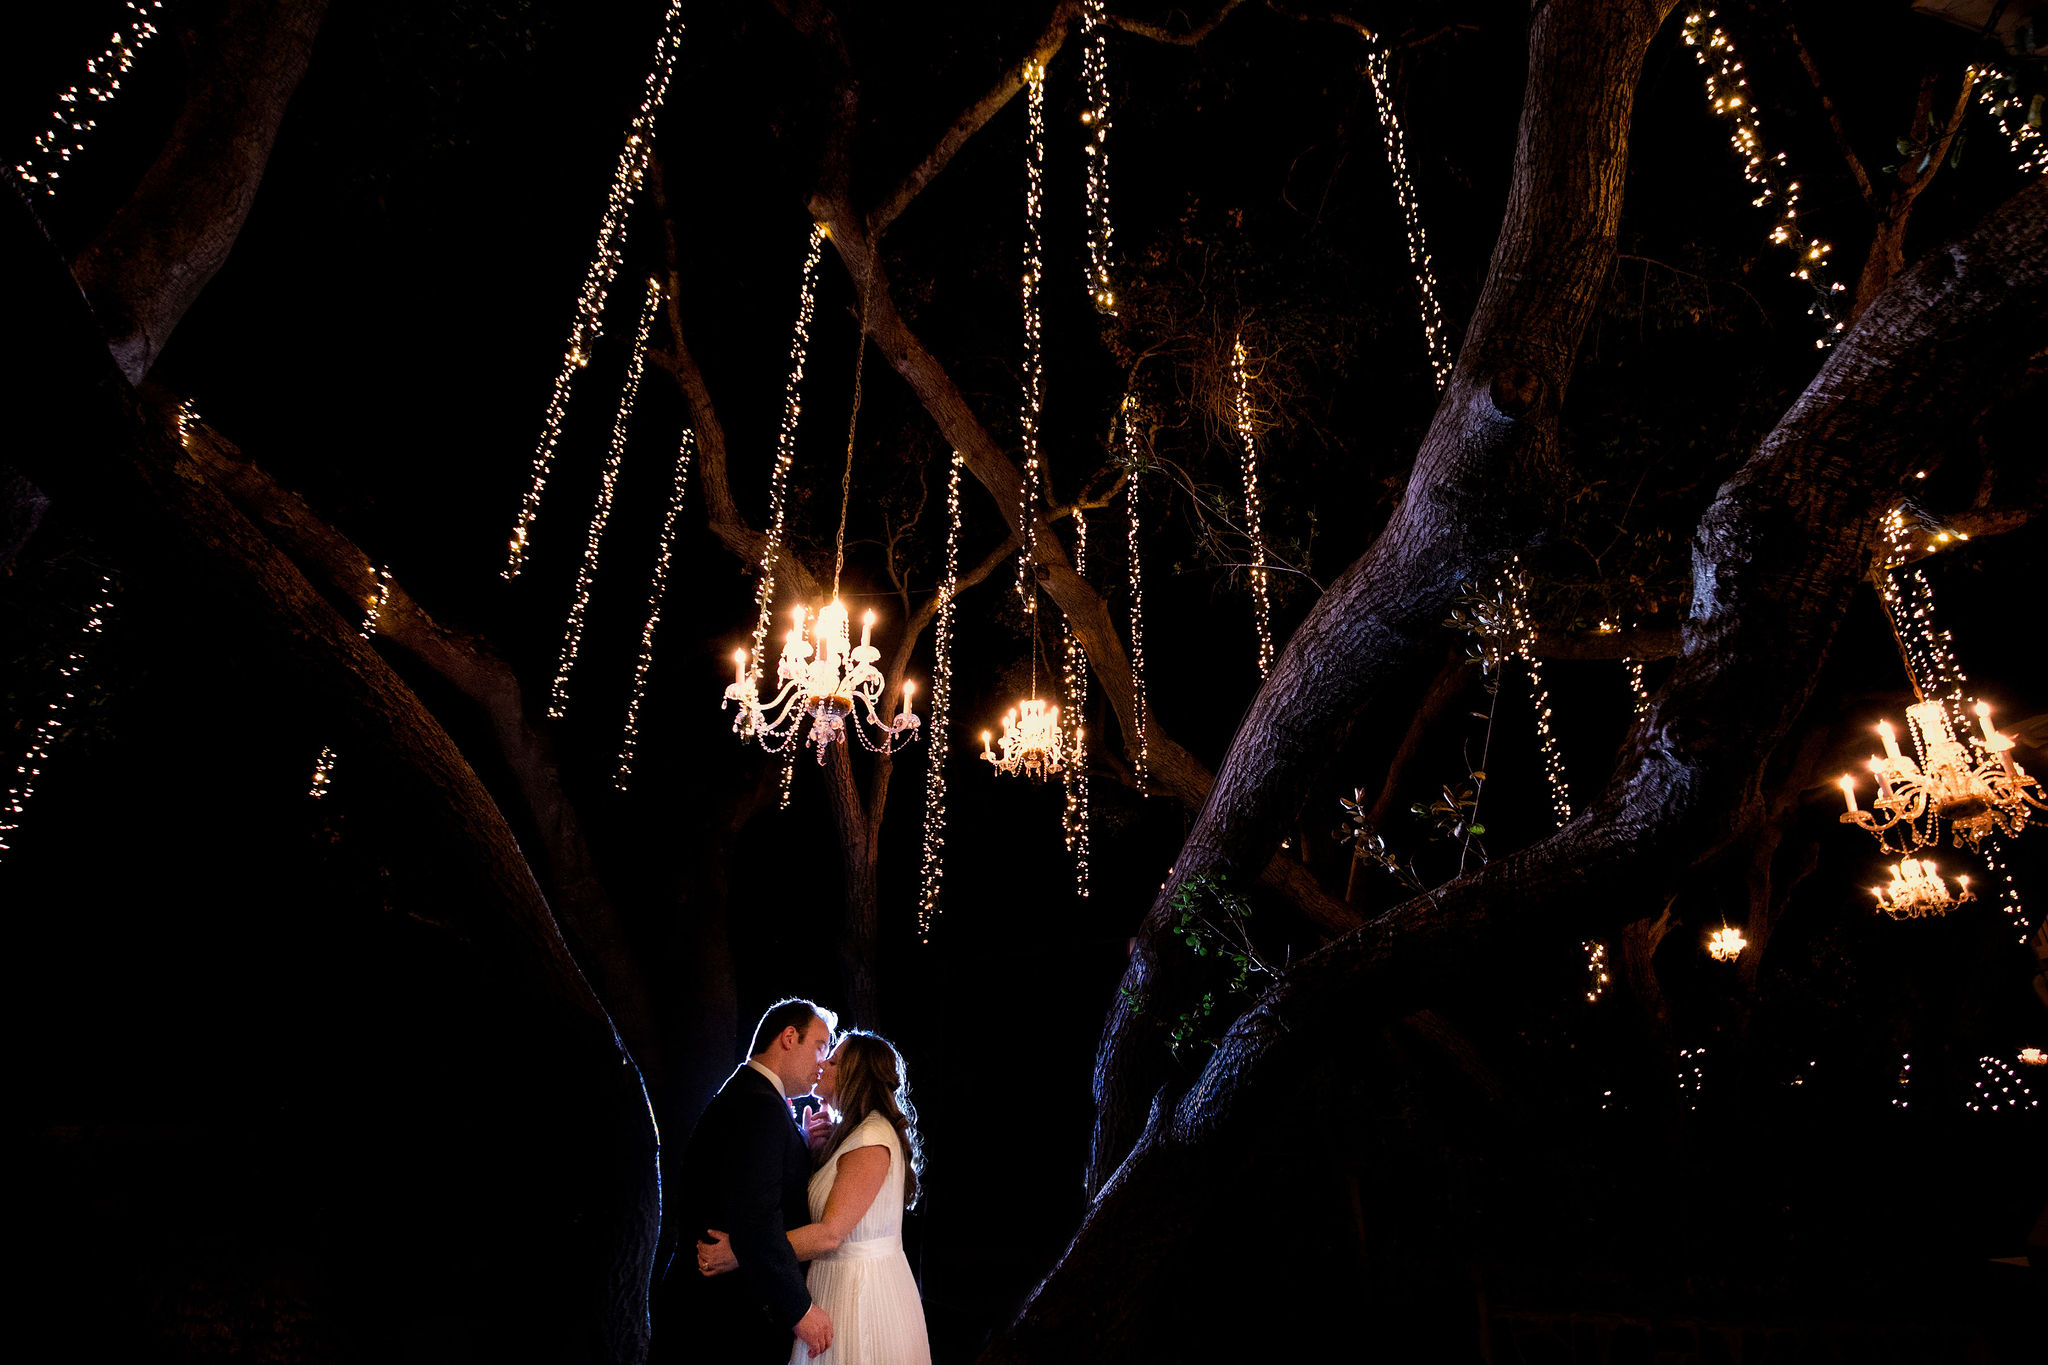 night time photo of bride and groom kissing under chandeliers and sparkling lights in trees